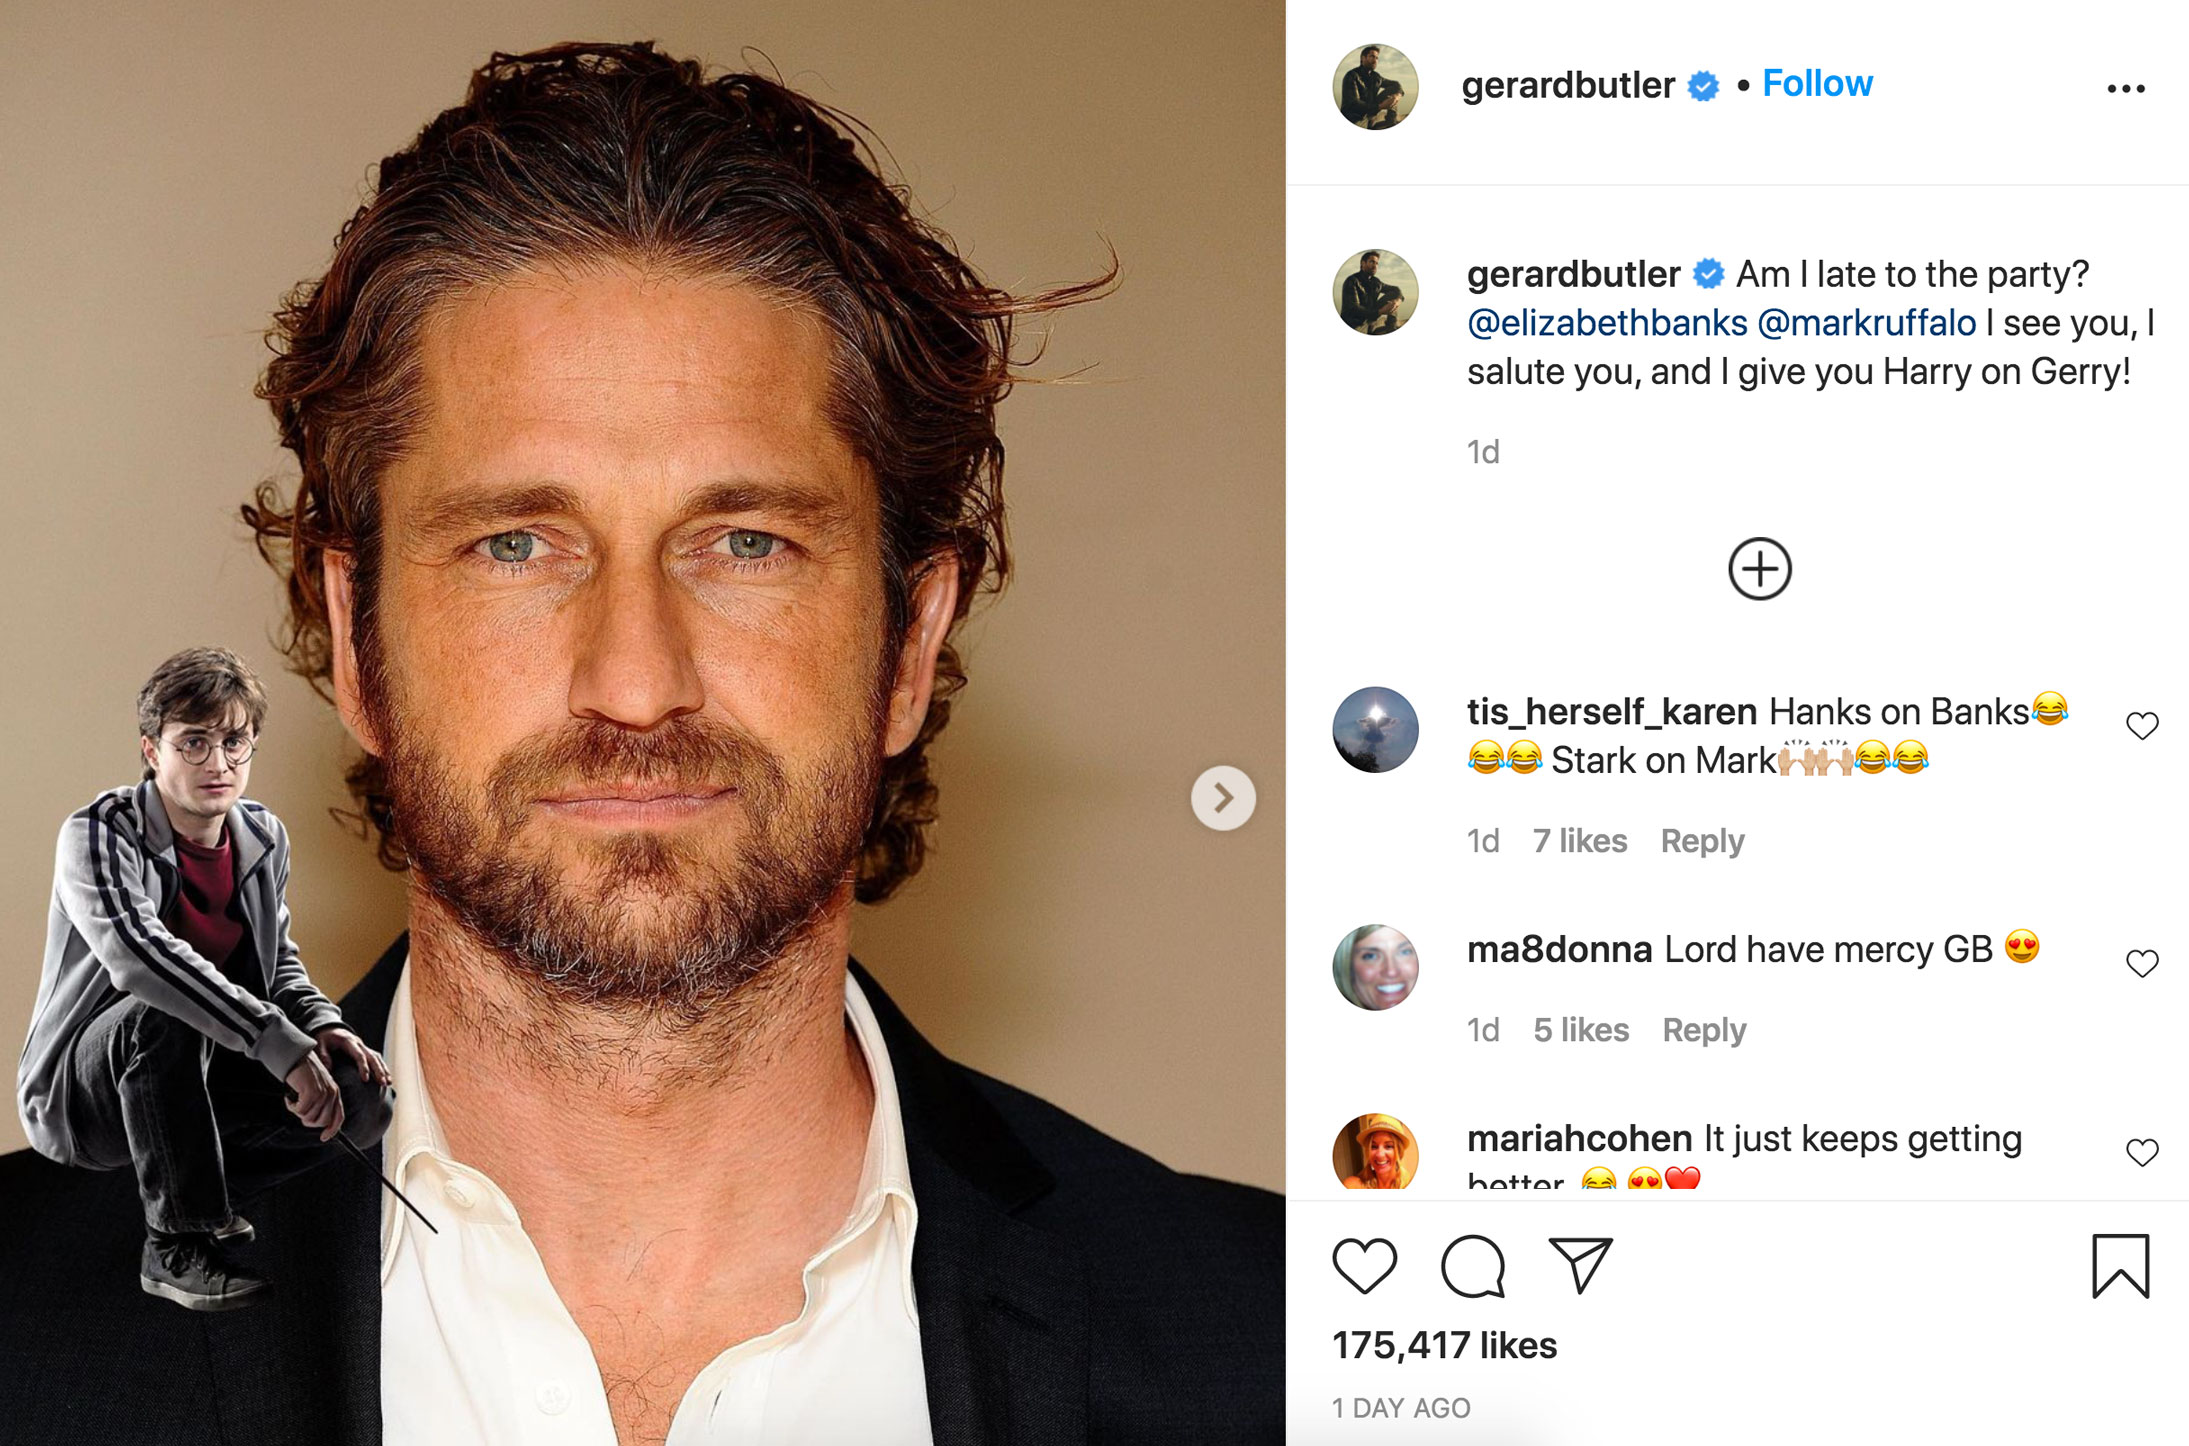 ruggedly handsome actors - gerardbutler. gerardbutler Am I late to the party? I see you! salute you, and I give you Harry on Gerry! 1d tis_herself_karen Hanks on Banks Stark on Mark 1d 7 madonna Lord have mercy Gb 1d 5 mariahcohen It just keeps getting ha